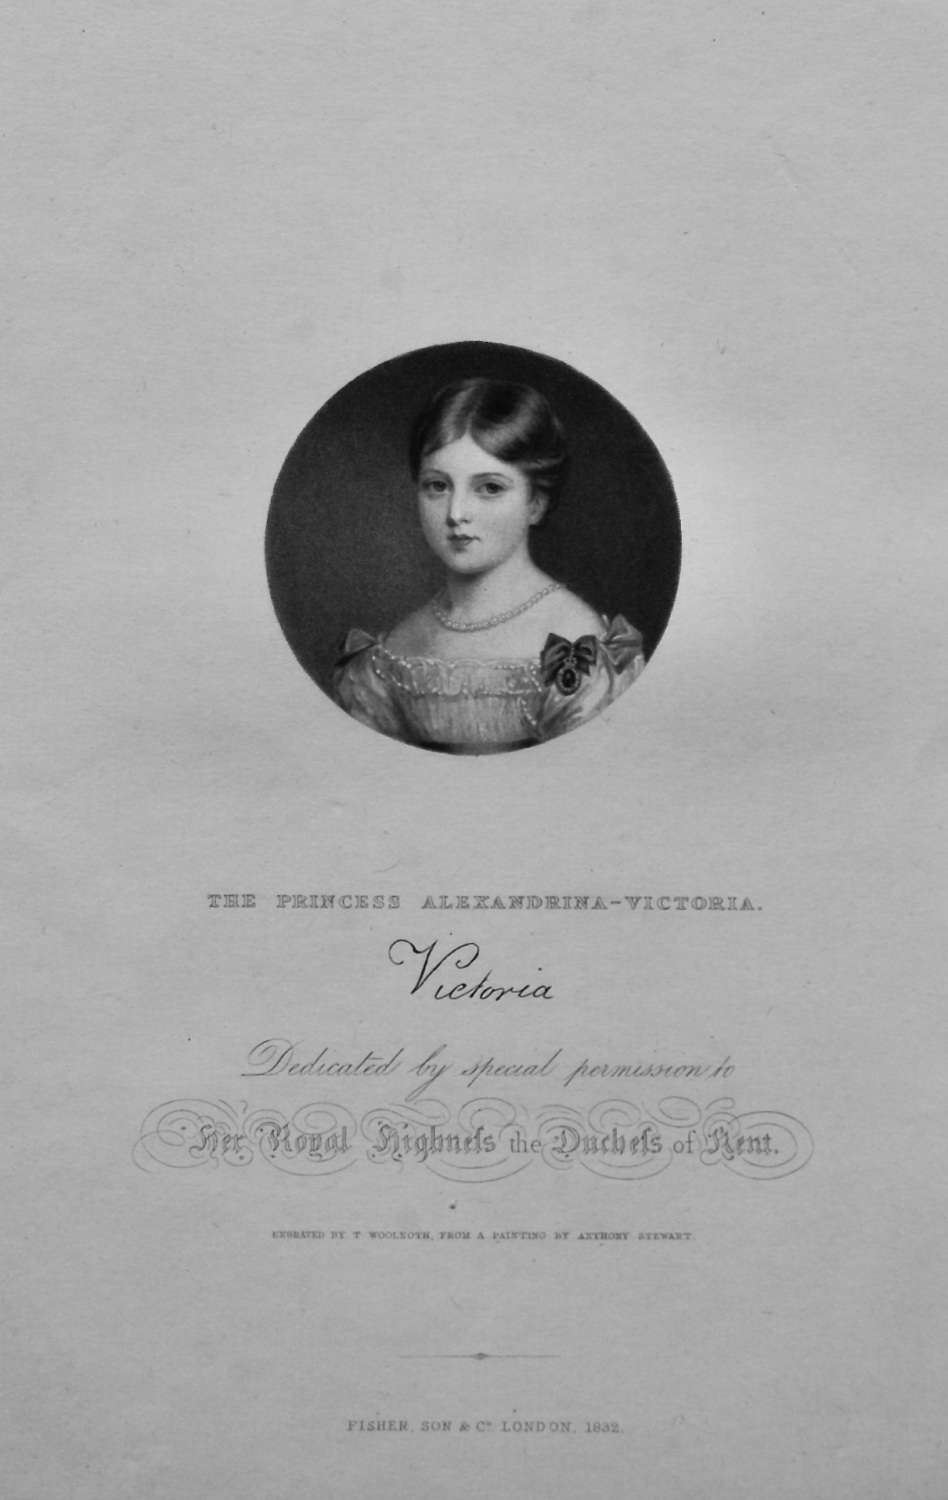 The Princess Alexandrina - Victoria.  Dedicated by special permission to he